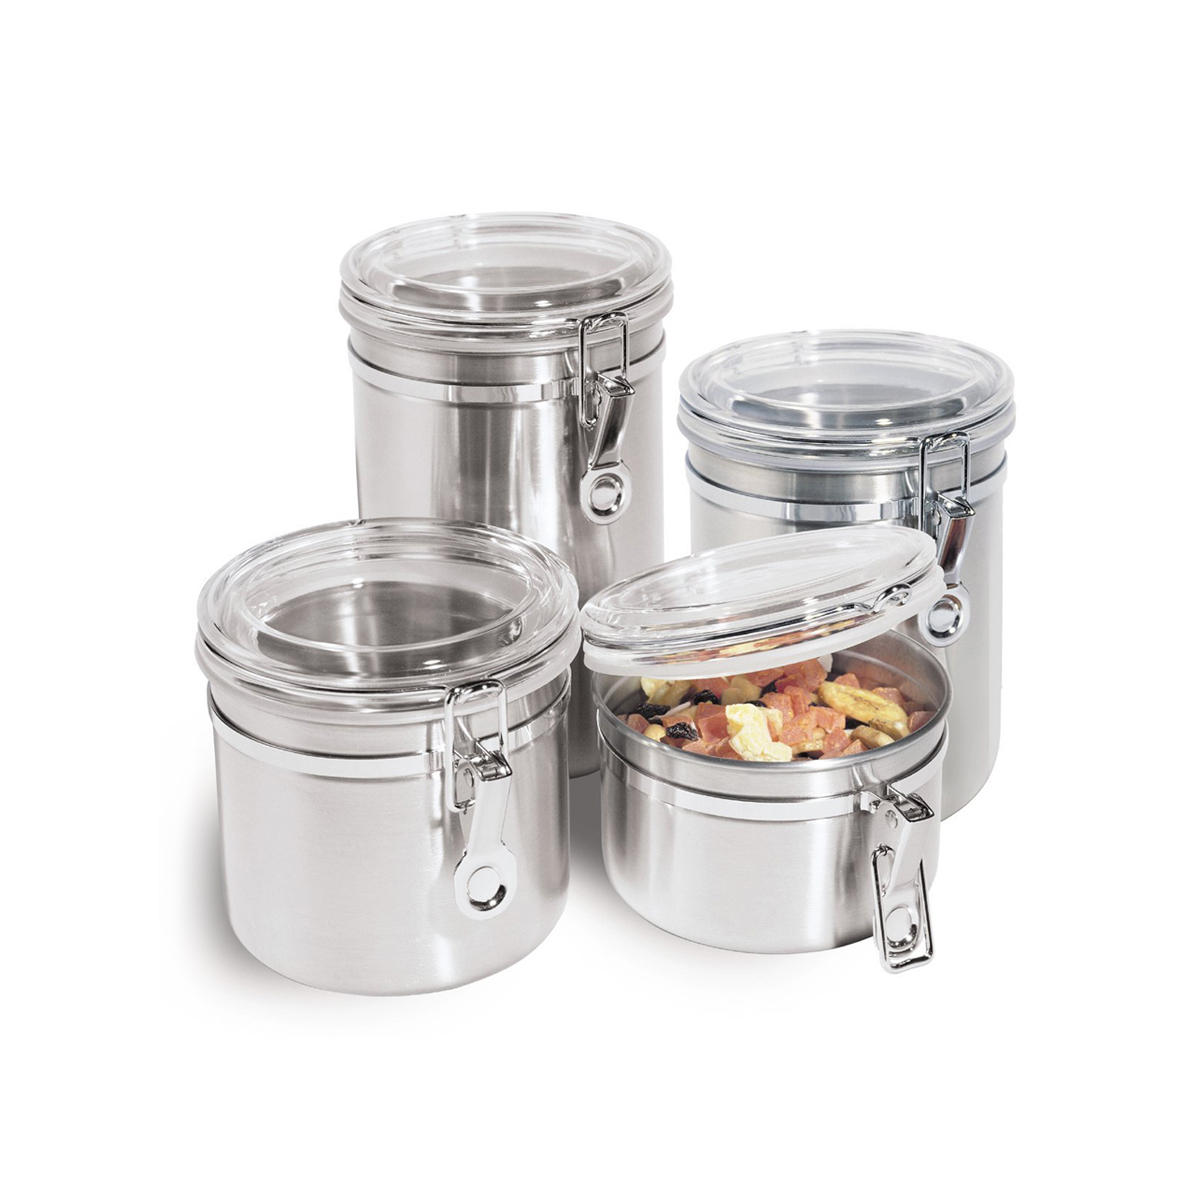 4 pcs Kitchen Food Fresh Stainless Steel Kitchen Storage Canister Containers Airtight Seal Lids